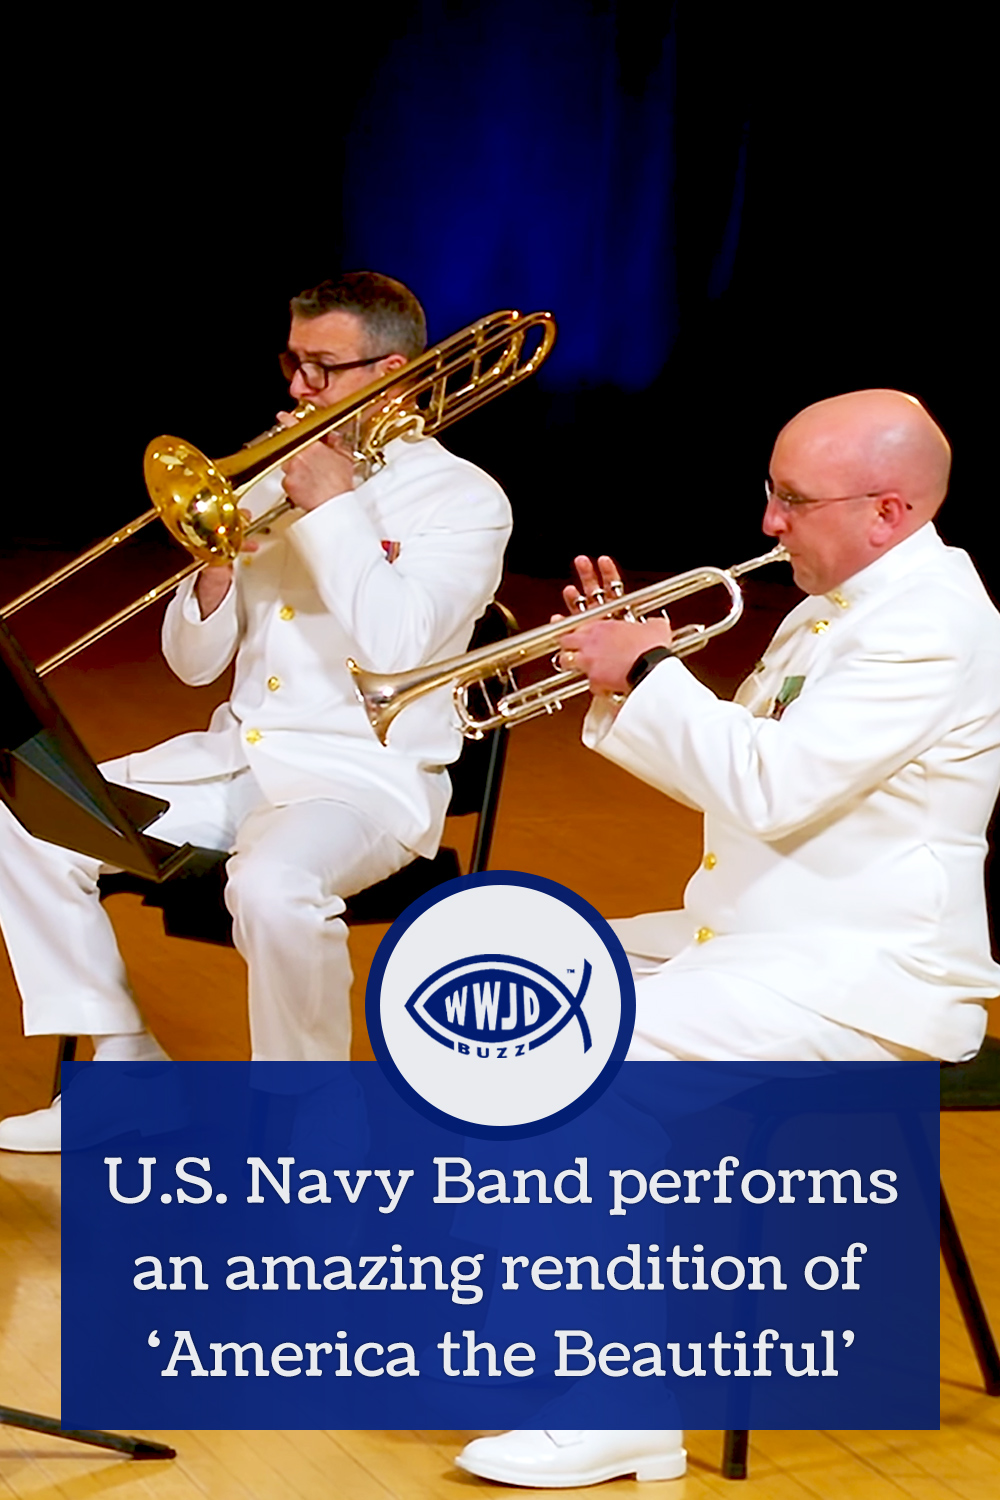 U.S. Navy Band performs an amazing rendition of ‘America the Beautiful’